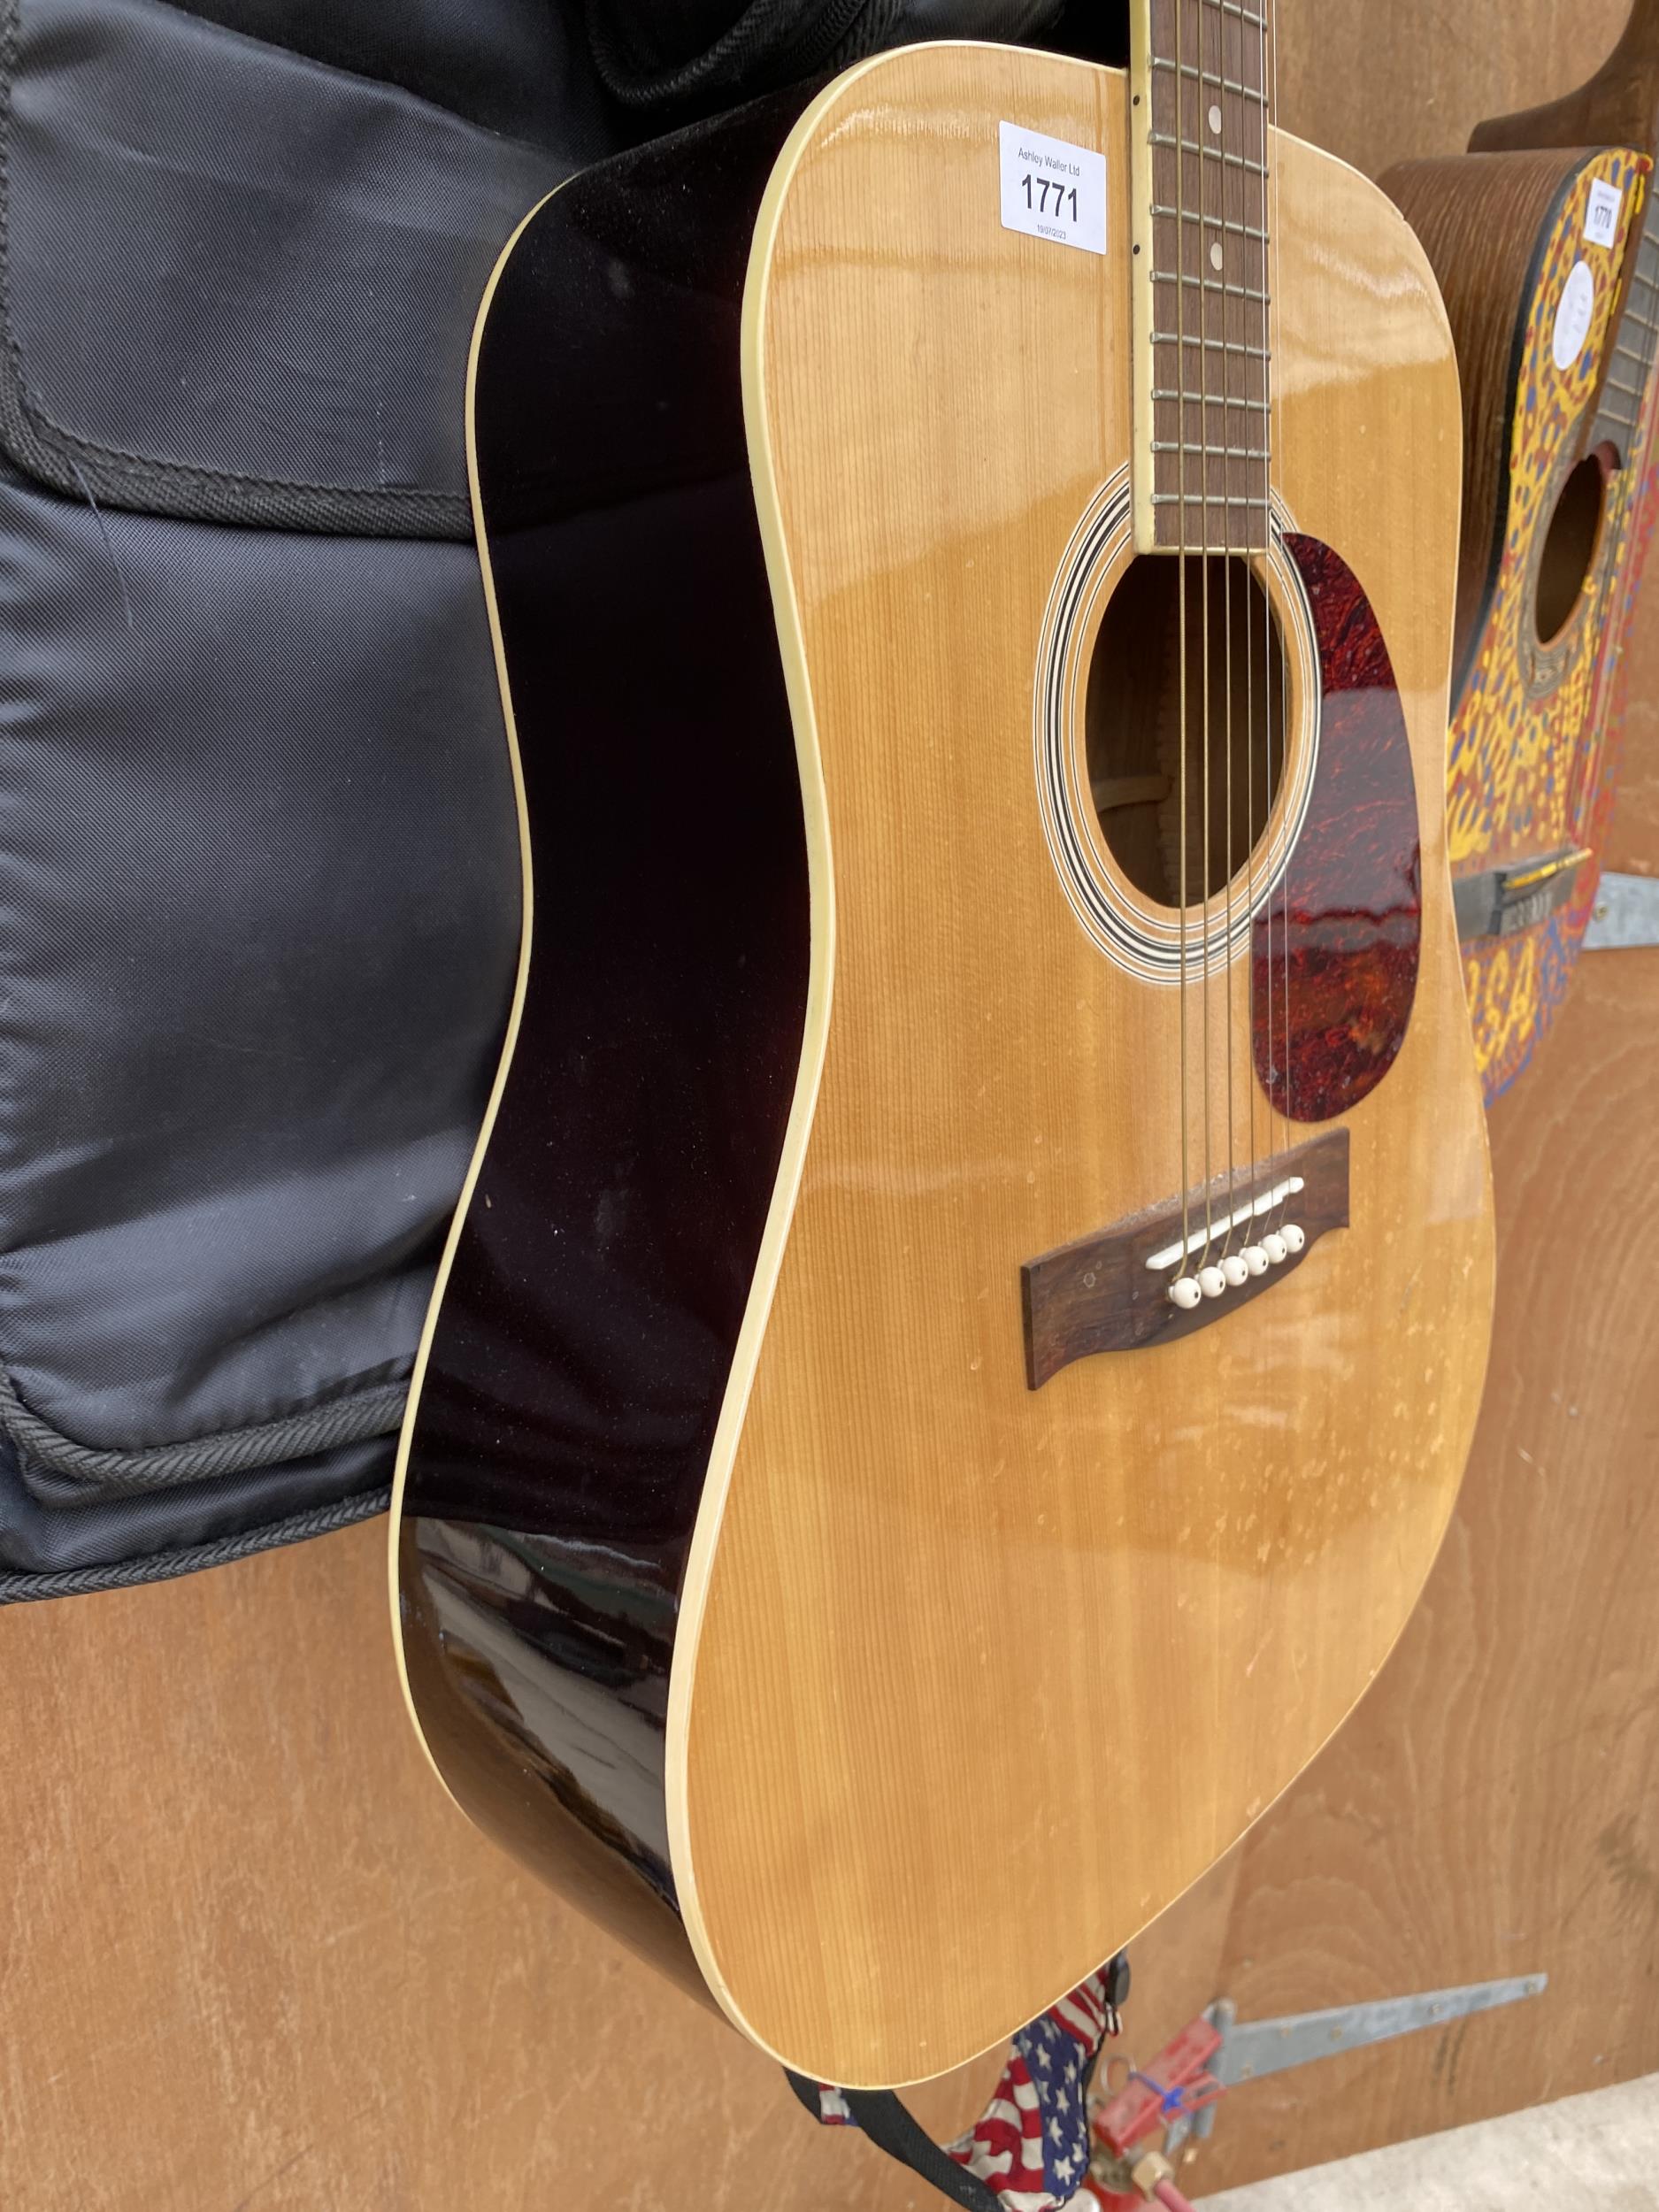 A COUNTRYMAN ACOUSTIC GUITAR WITH CARRY CASE - Image 4 of 4